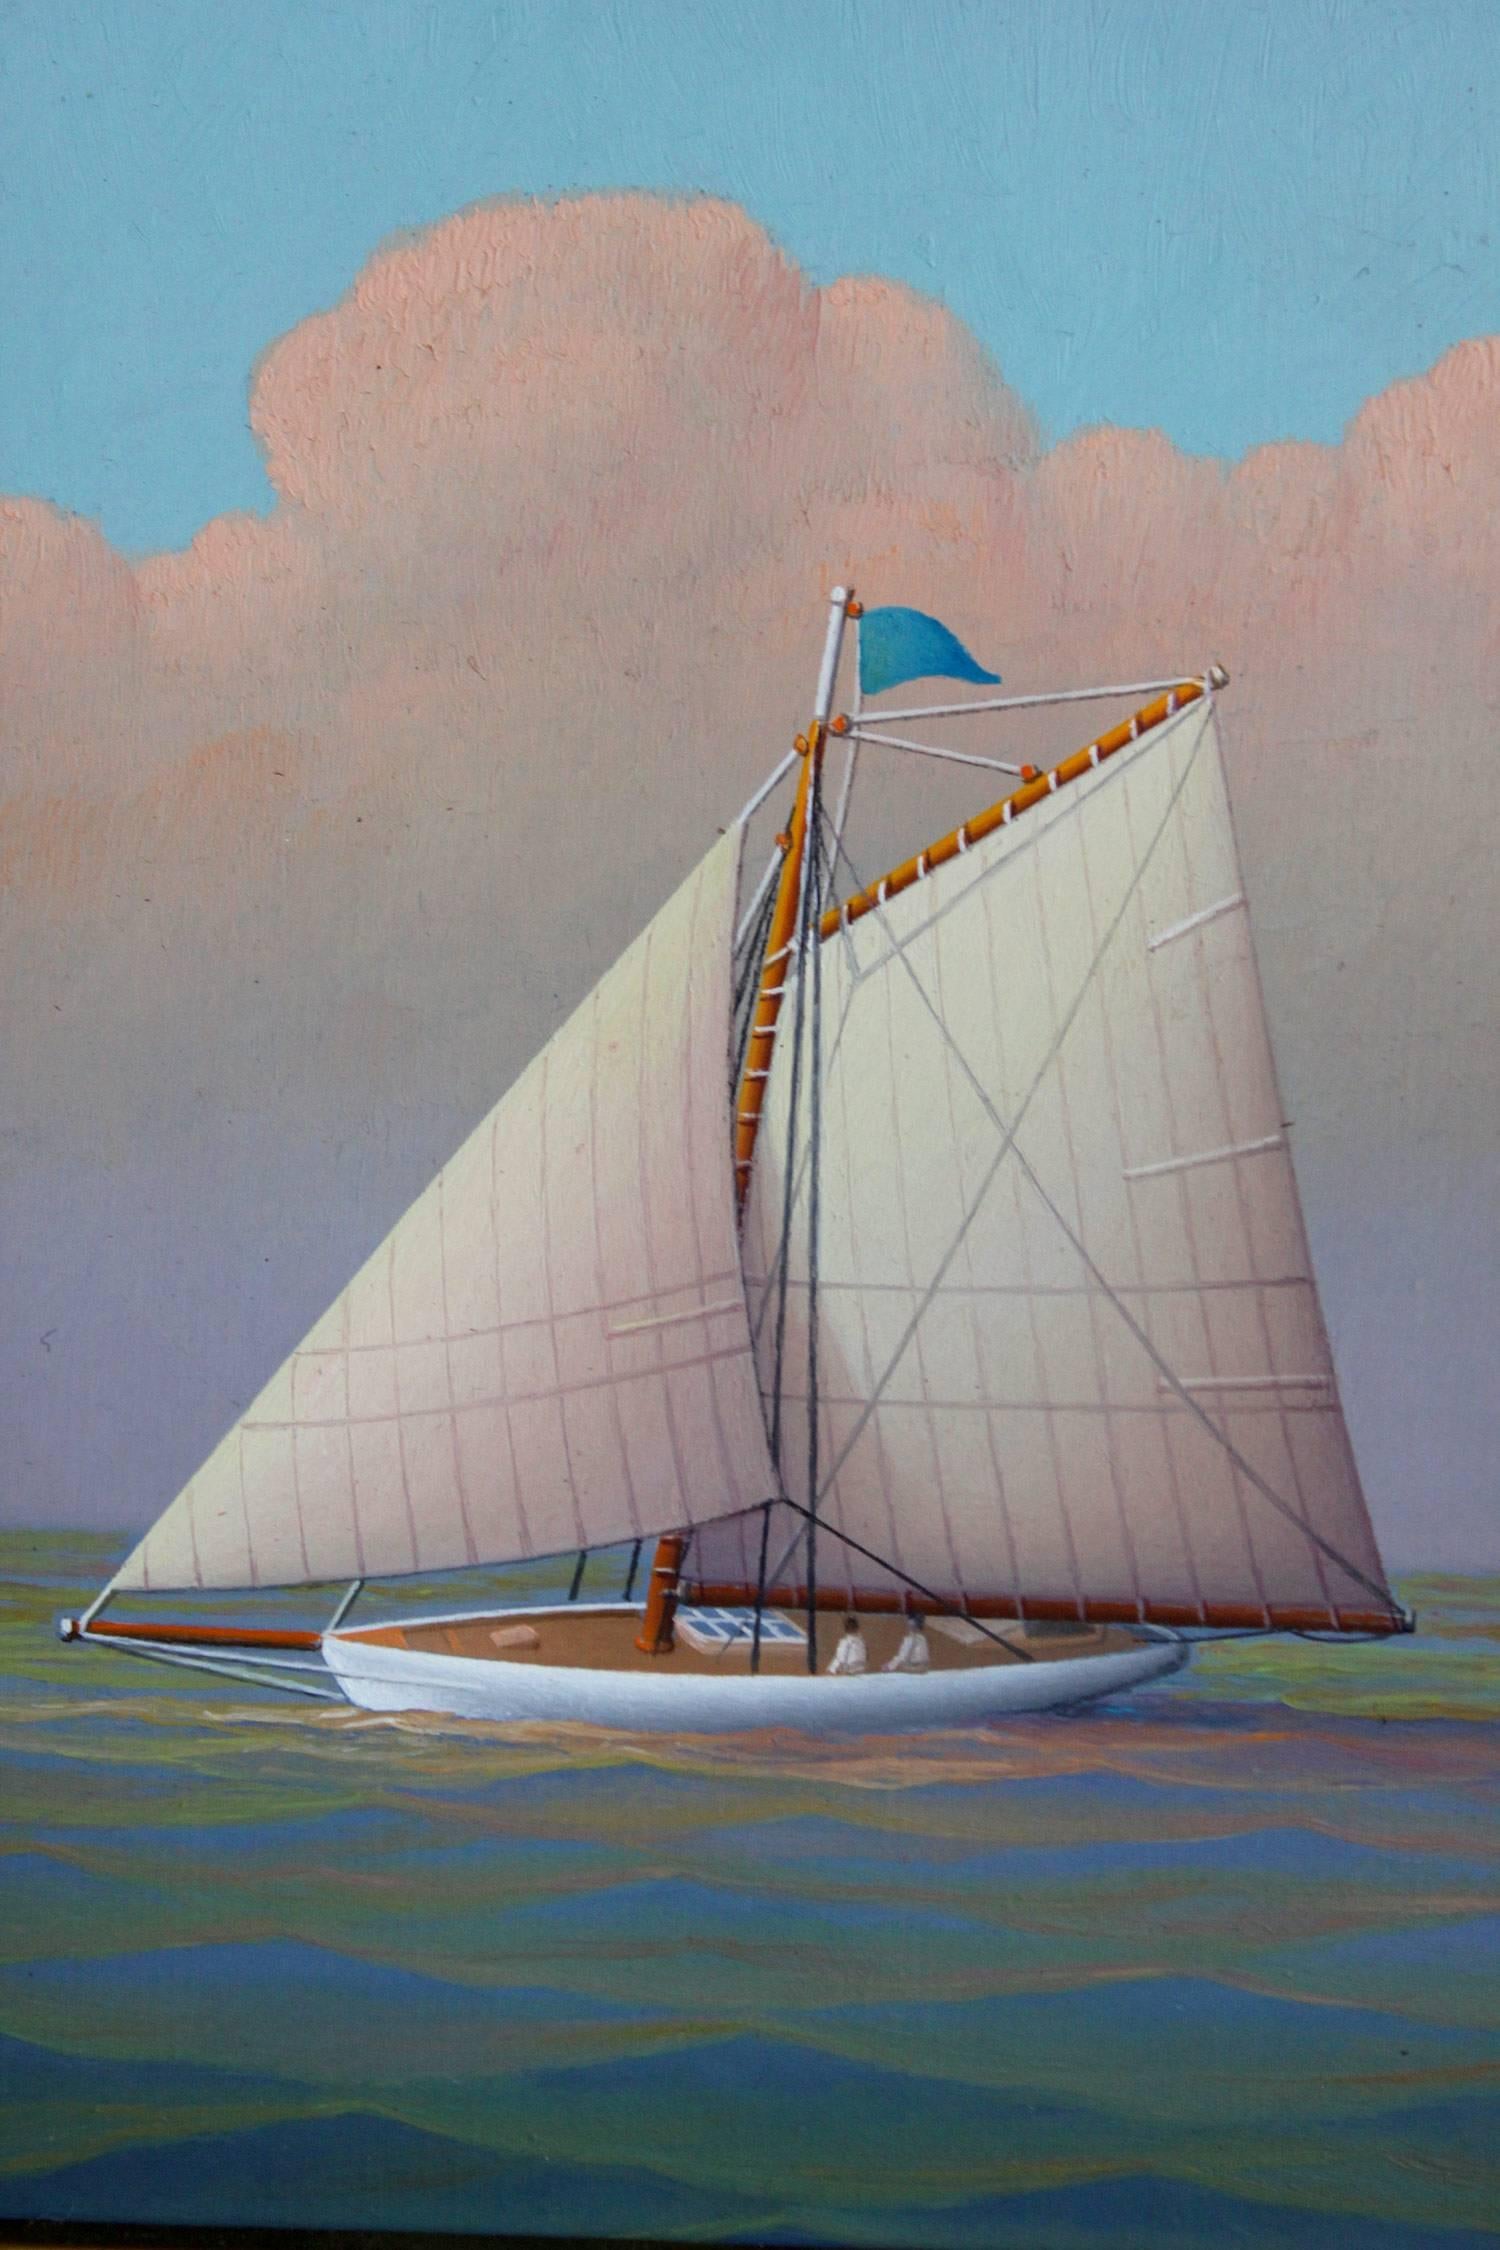 George Nemethy is known for his pastoral miniature sail boat oil paintings. In this highly detailed artwork, we can find a peaceful sailboat drifting on the sea. His dreamy puffed clouds that are so effortlessly contrasted with the majestic blues in